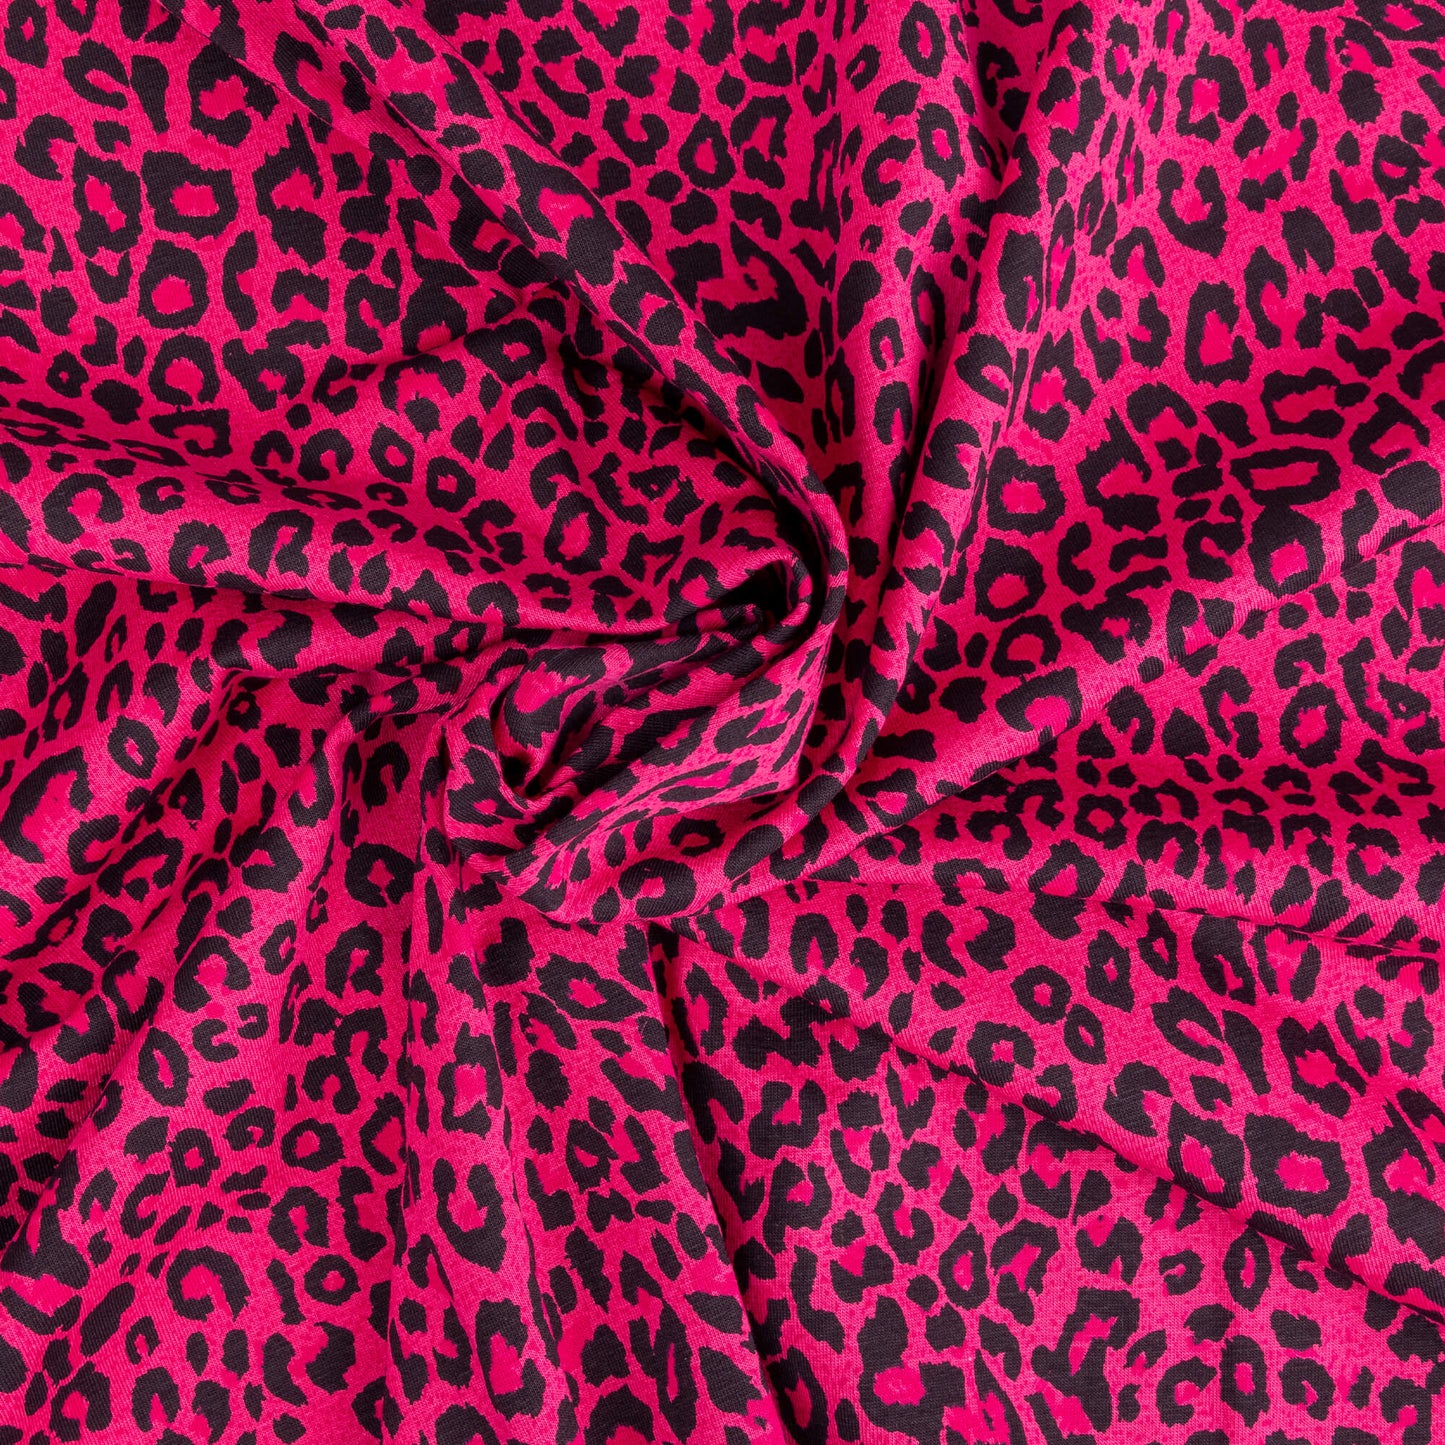 A twirl of bright pink and black leopard print fabric in a soft jersey t-shirt weight perfect for crafting